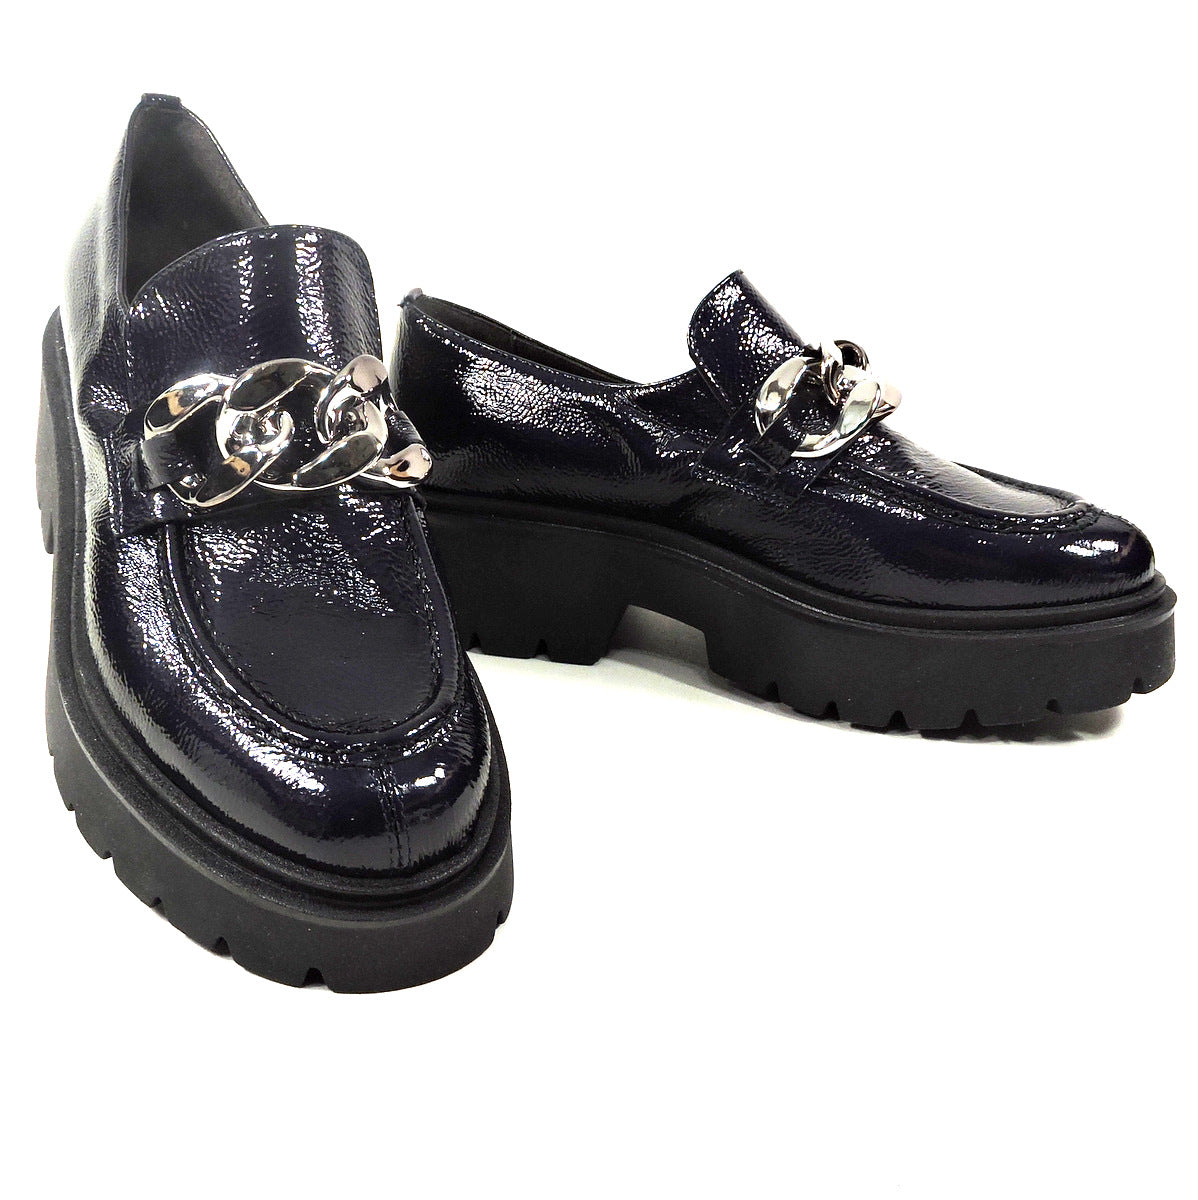 SOFFICE SOGNO 🇮🇹 WOMEN'S NAVY BLUE PATENT LEATHER FASHION LOAFERS